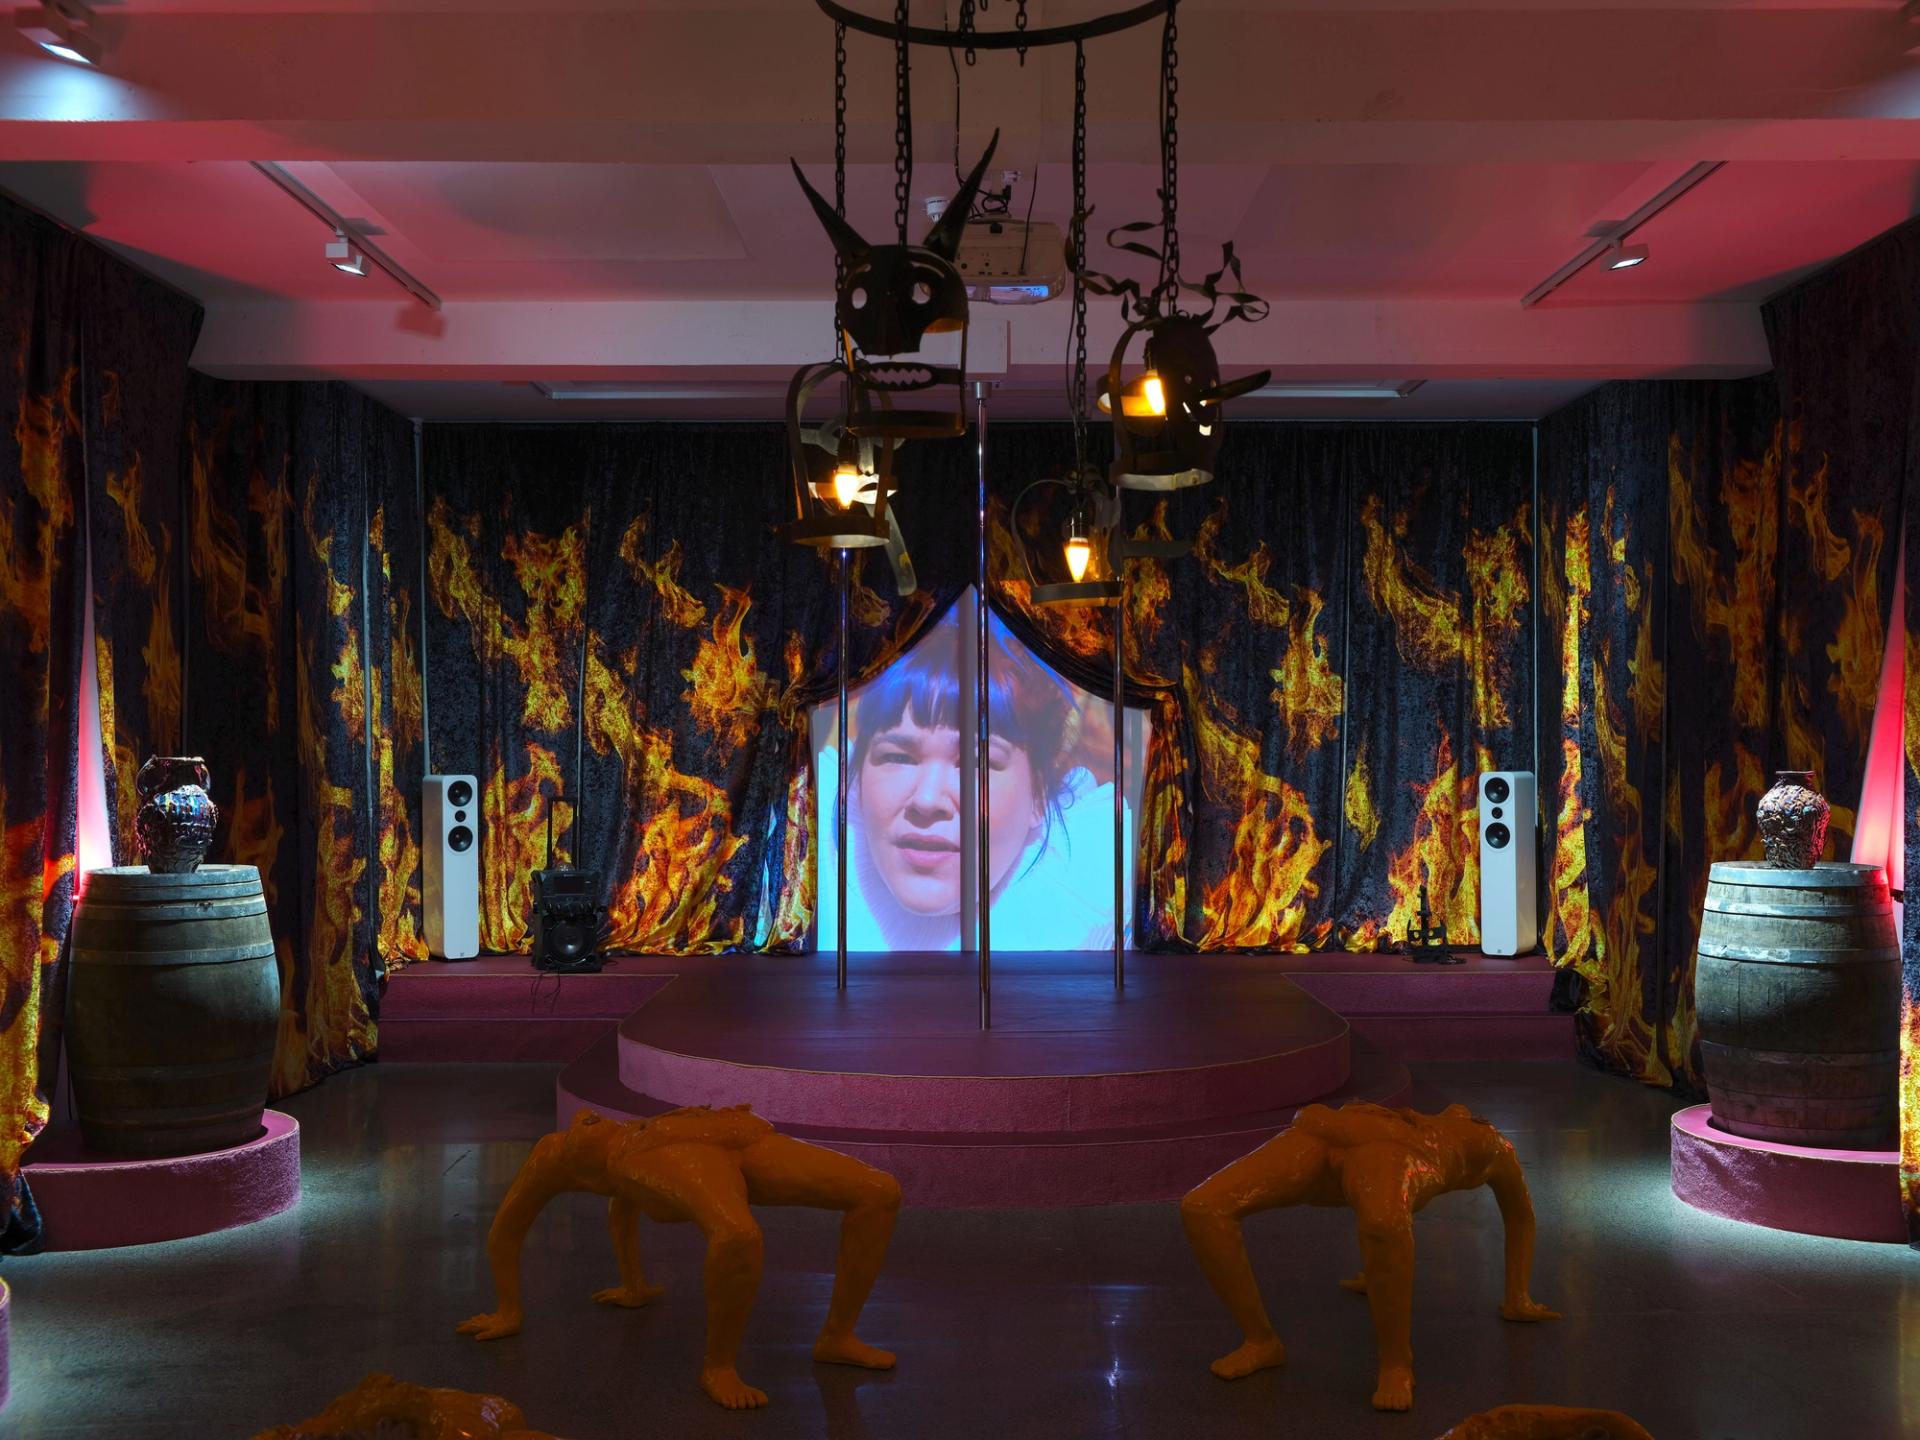 A projection of the artist Lindsey Mendick appears behind fiery curtains as part of her new solo show at Carl Freedman Gallery



Copyright of Lindsey Mendick, Courtesy of Carl Freedman Gallery, Margate. Photo: Ollie Harrop